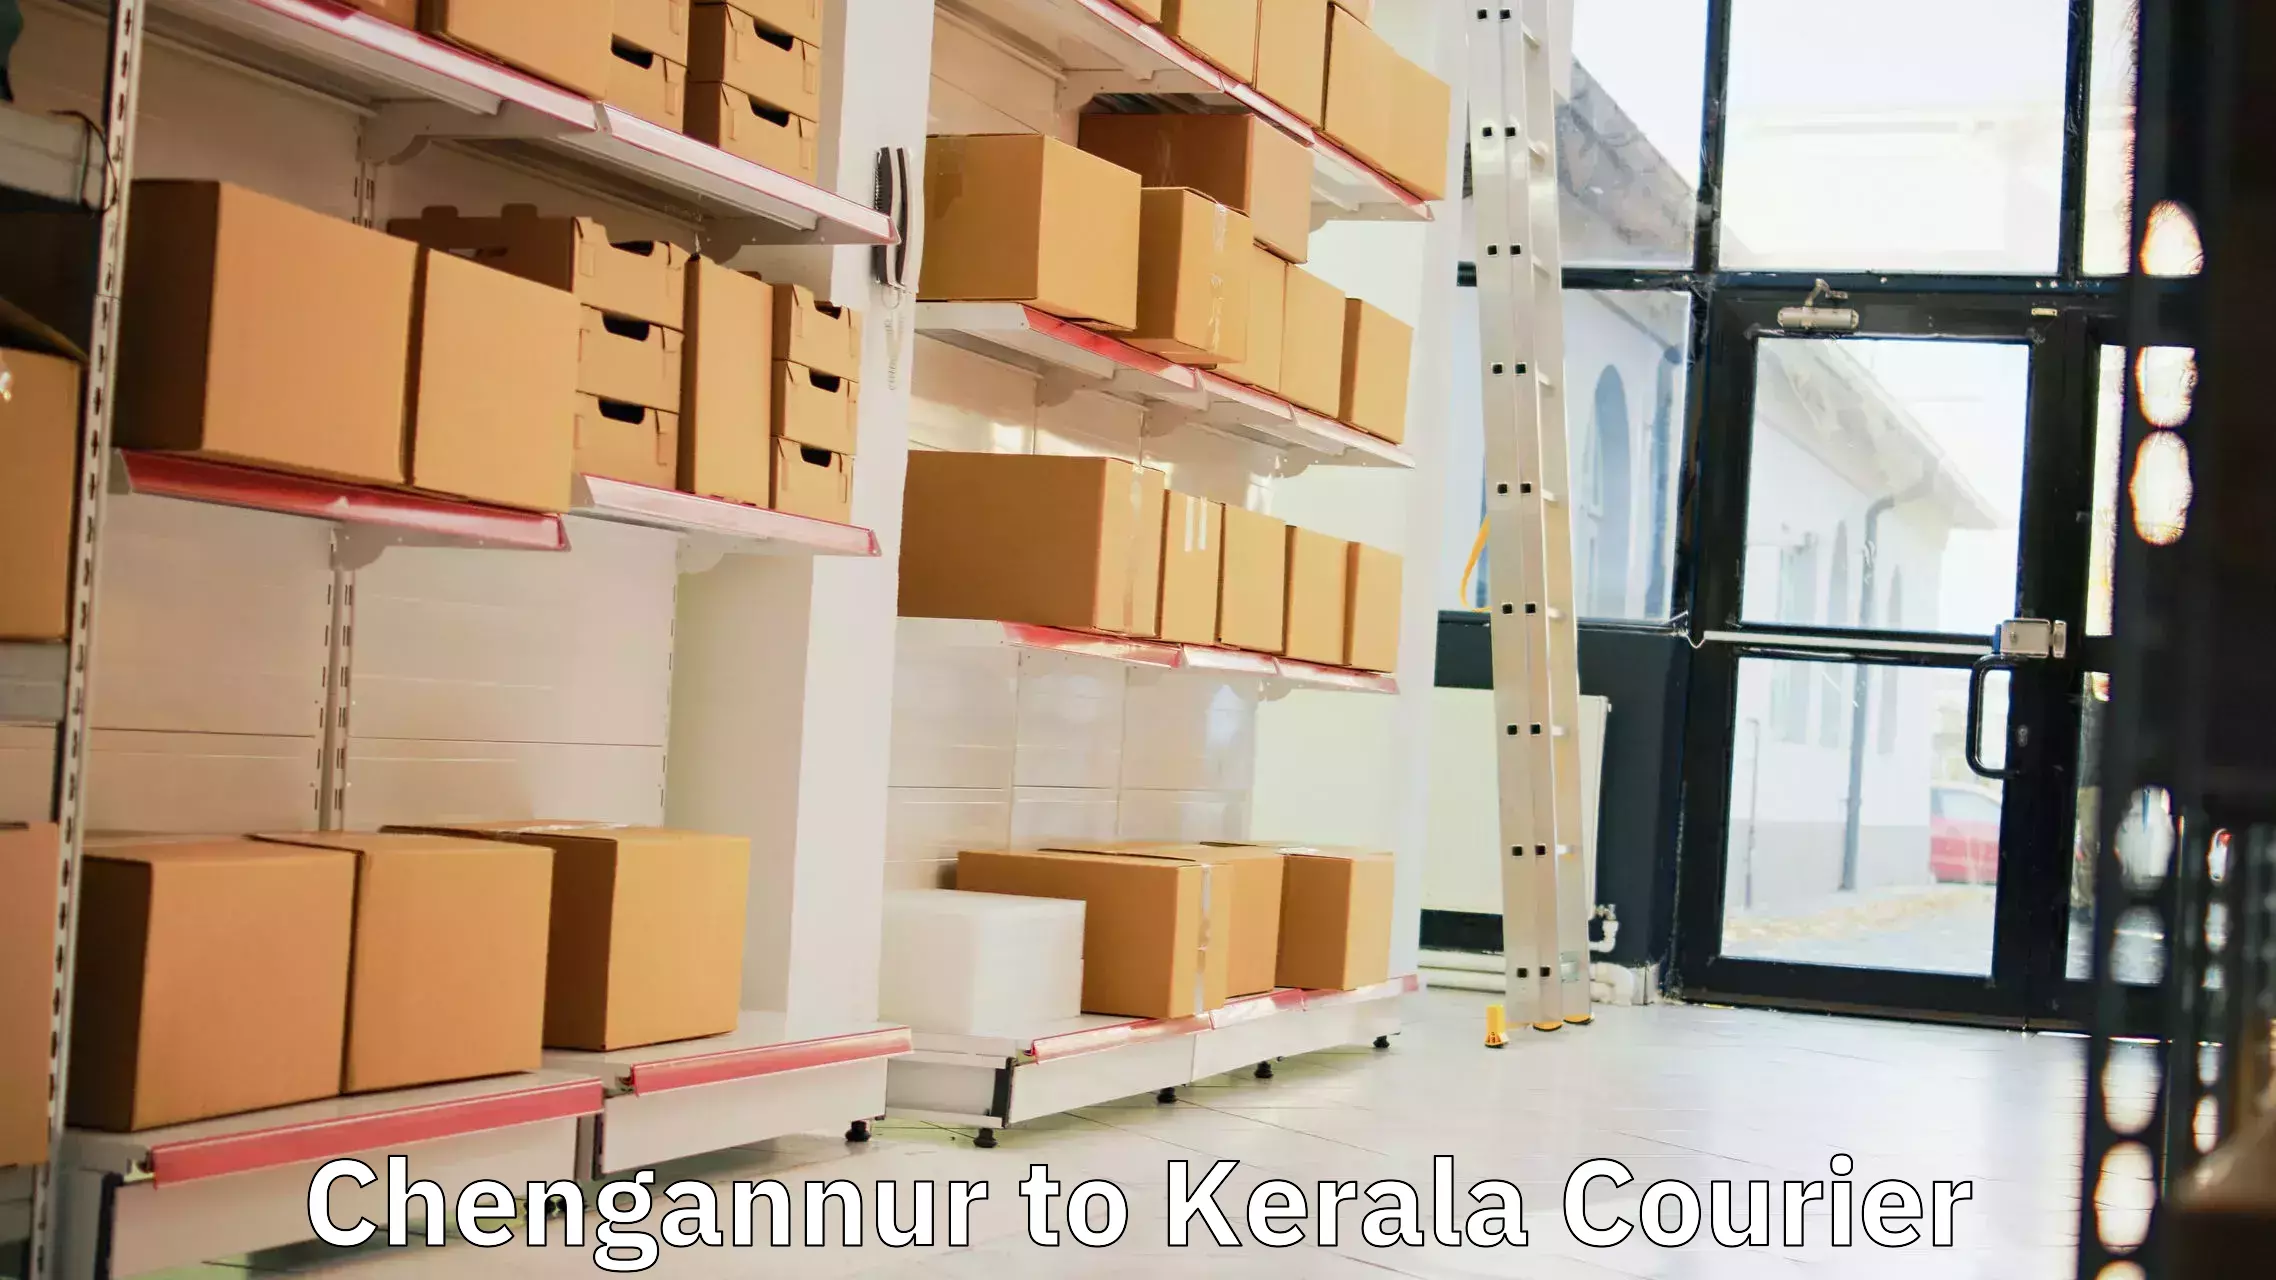 Smart courier technologies Chengannur to Cochin University of Science and Technology